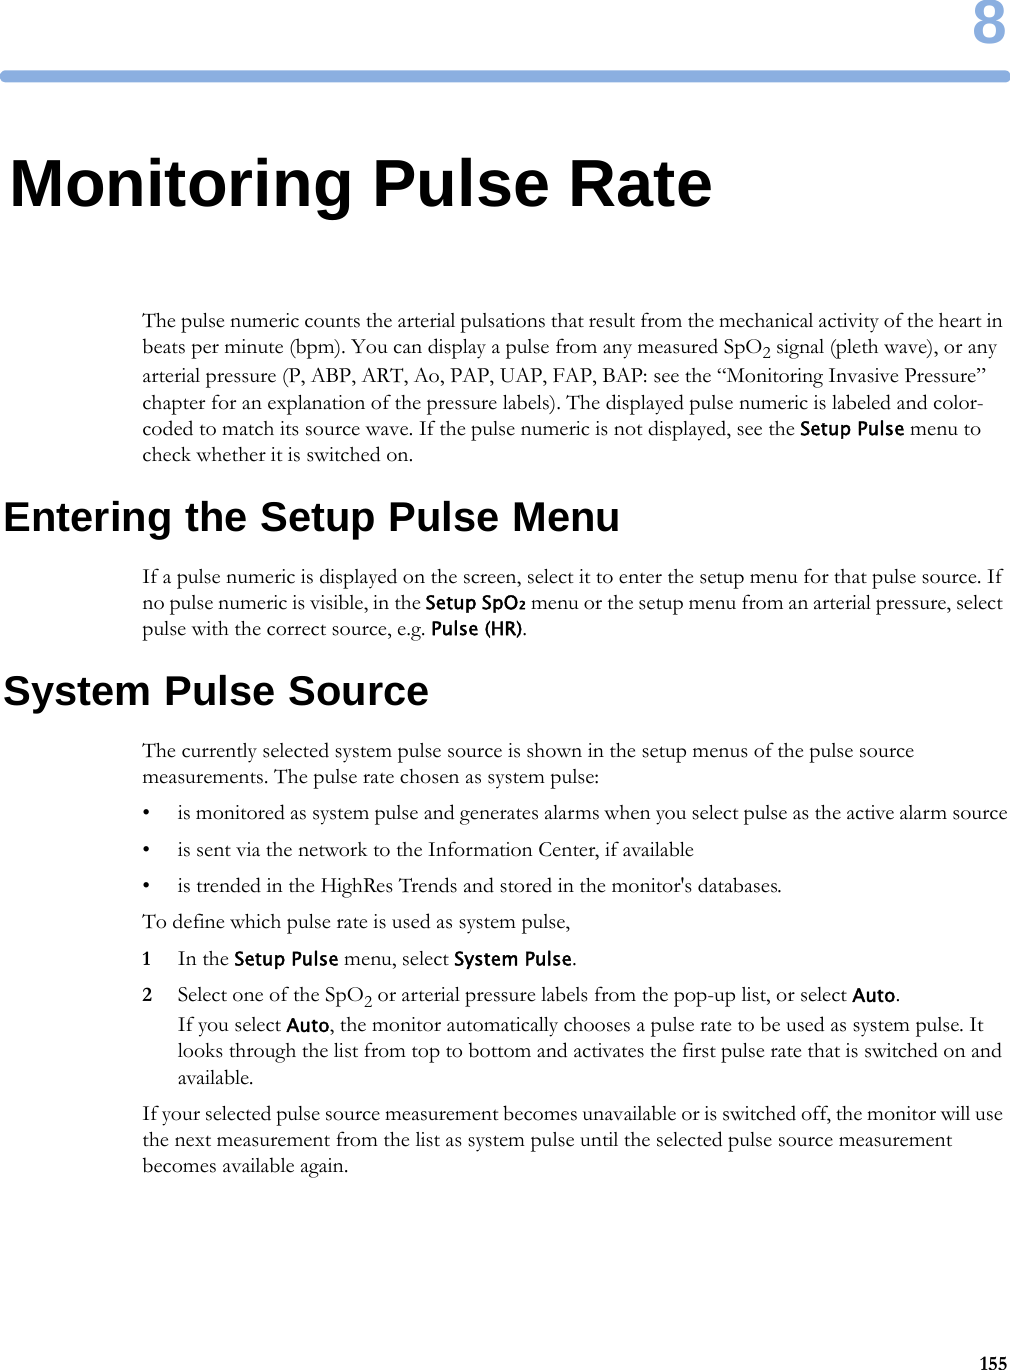 81558Monitoring Pulse RateThe pulse numeric counts the arterial pulsations that result from the mechanical activity of the heart in beats per minute (bpm). You can display a pulse from any measured SpO2 signal (pleth wave), or any arterial pressure (P, ABP, ART, Ao, PAP, UAP, FAP, BAP: see the “Monitoring Invasive Pressure” chapter for an explanation of the pressure labels). The displayed pulse numeric is labeled and color-coded to match its source wave. If the pulse numeric is not displayed, see the Setup Pulse menu to check whether it is switched on.Entering the Setup Pulse MenuIf a pulse numeric is displayed on the screen, select it to enter the setup menu for that pulse source. If no pulse numeric is visible, in the Setup SpO₂ menu or the setup menu from an arterial pressure, select pulse with the correct source, e.g. Pulse (HR).System Pulse SourceThe currently selected system pulse source is shown in the setup menus of the pulse source measurements. The pulse rate chosen as system pulse:• is monitored as system pulse and generates alarms when you select pulse as the active alarm source• is sent via the network to the Information Center, if available• is trended in the HighRes Trends and stored in the monitor&apos;s databases.To define which pulse rate is used as system pulse,1In the Setup Pulse menu, select System Pulse.2Select one of the SpO2 or arterial pressure labels from the pop-up list, or select Auto. If you select Auto, the monitor automatically chooses a pulse rate to be used as system pulse. It looks through the list from top to bottom and activates the first pulse rate that is switched on and available.If your selected pulse source measurement becomes unavailable or is switched off, the monitor will use the next measurement from the list as system pulse until the selected pulse source measurement becomes available again.